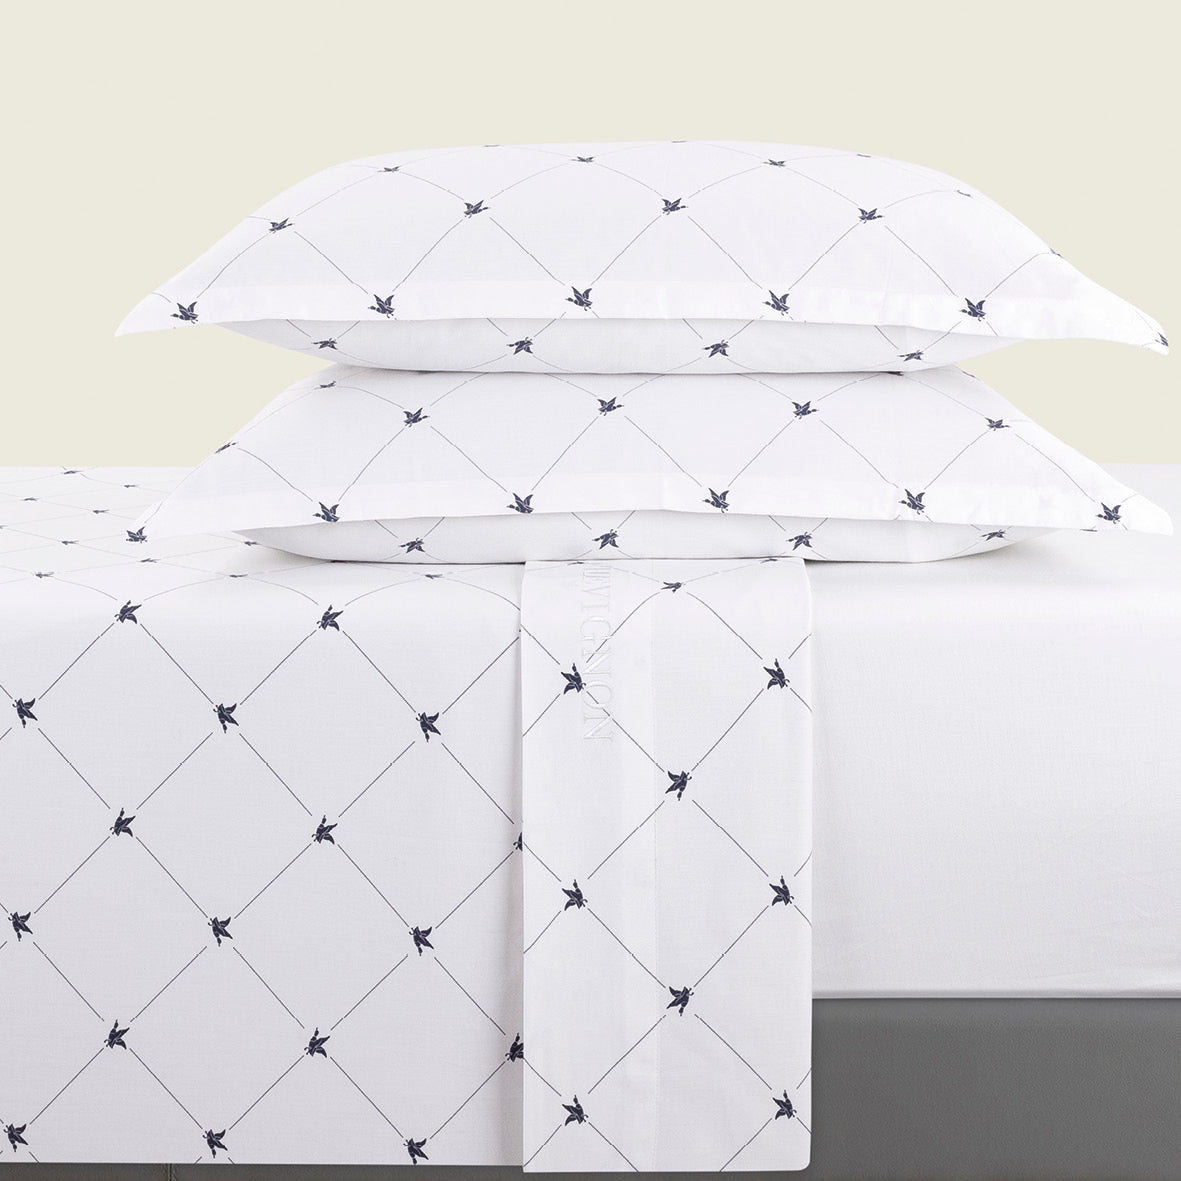 Sheet set : fitted sheet, flat sheet, pillowcase(s) in satin cotton - Canards Evy white